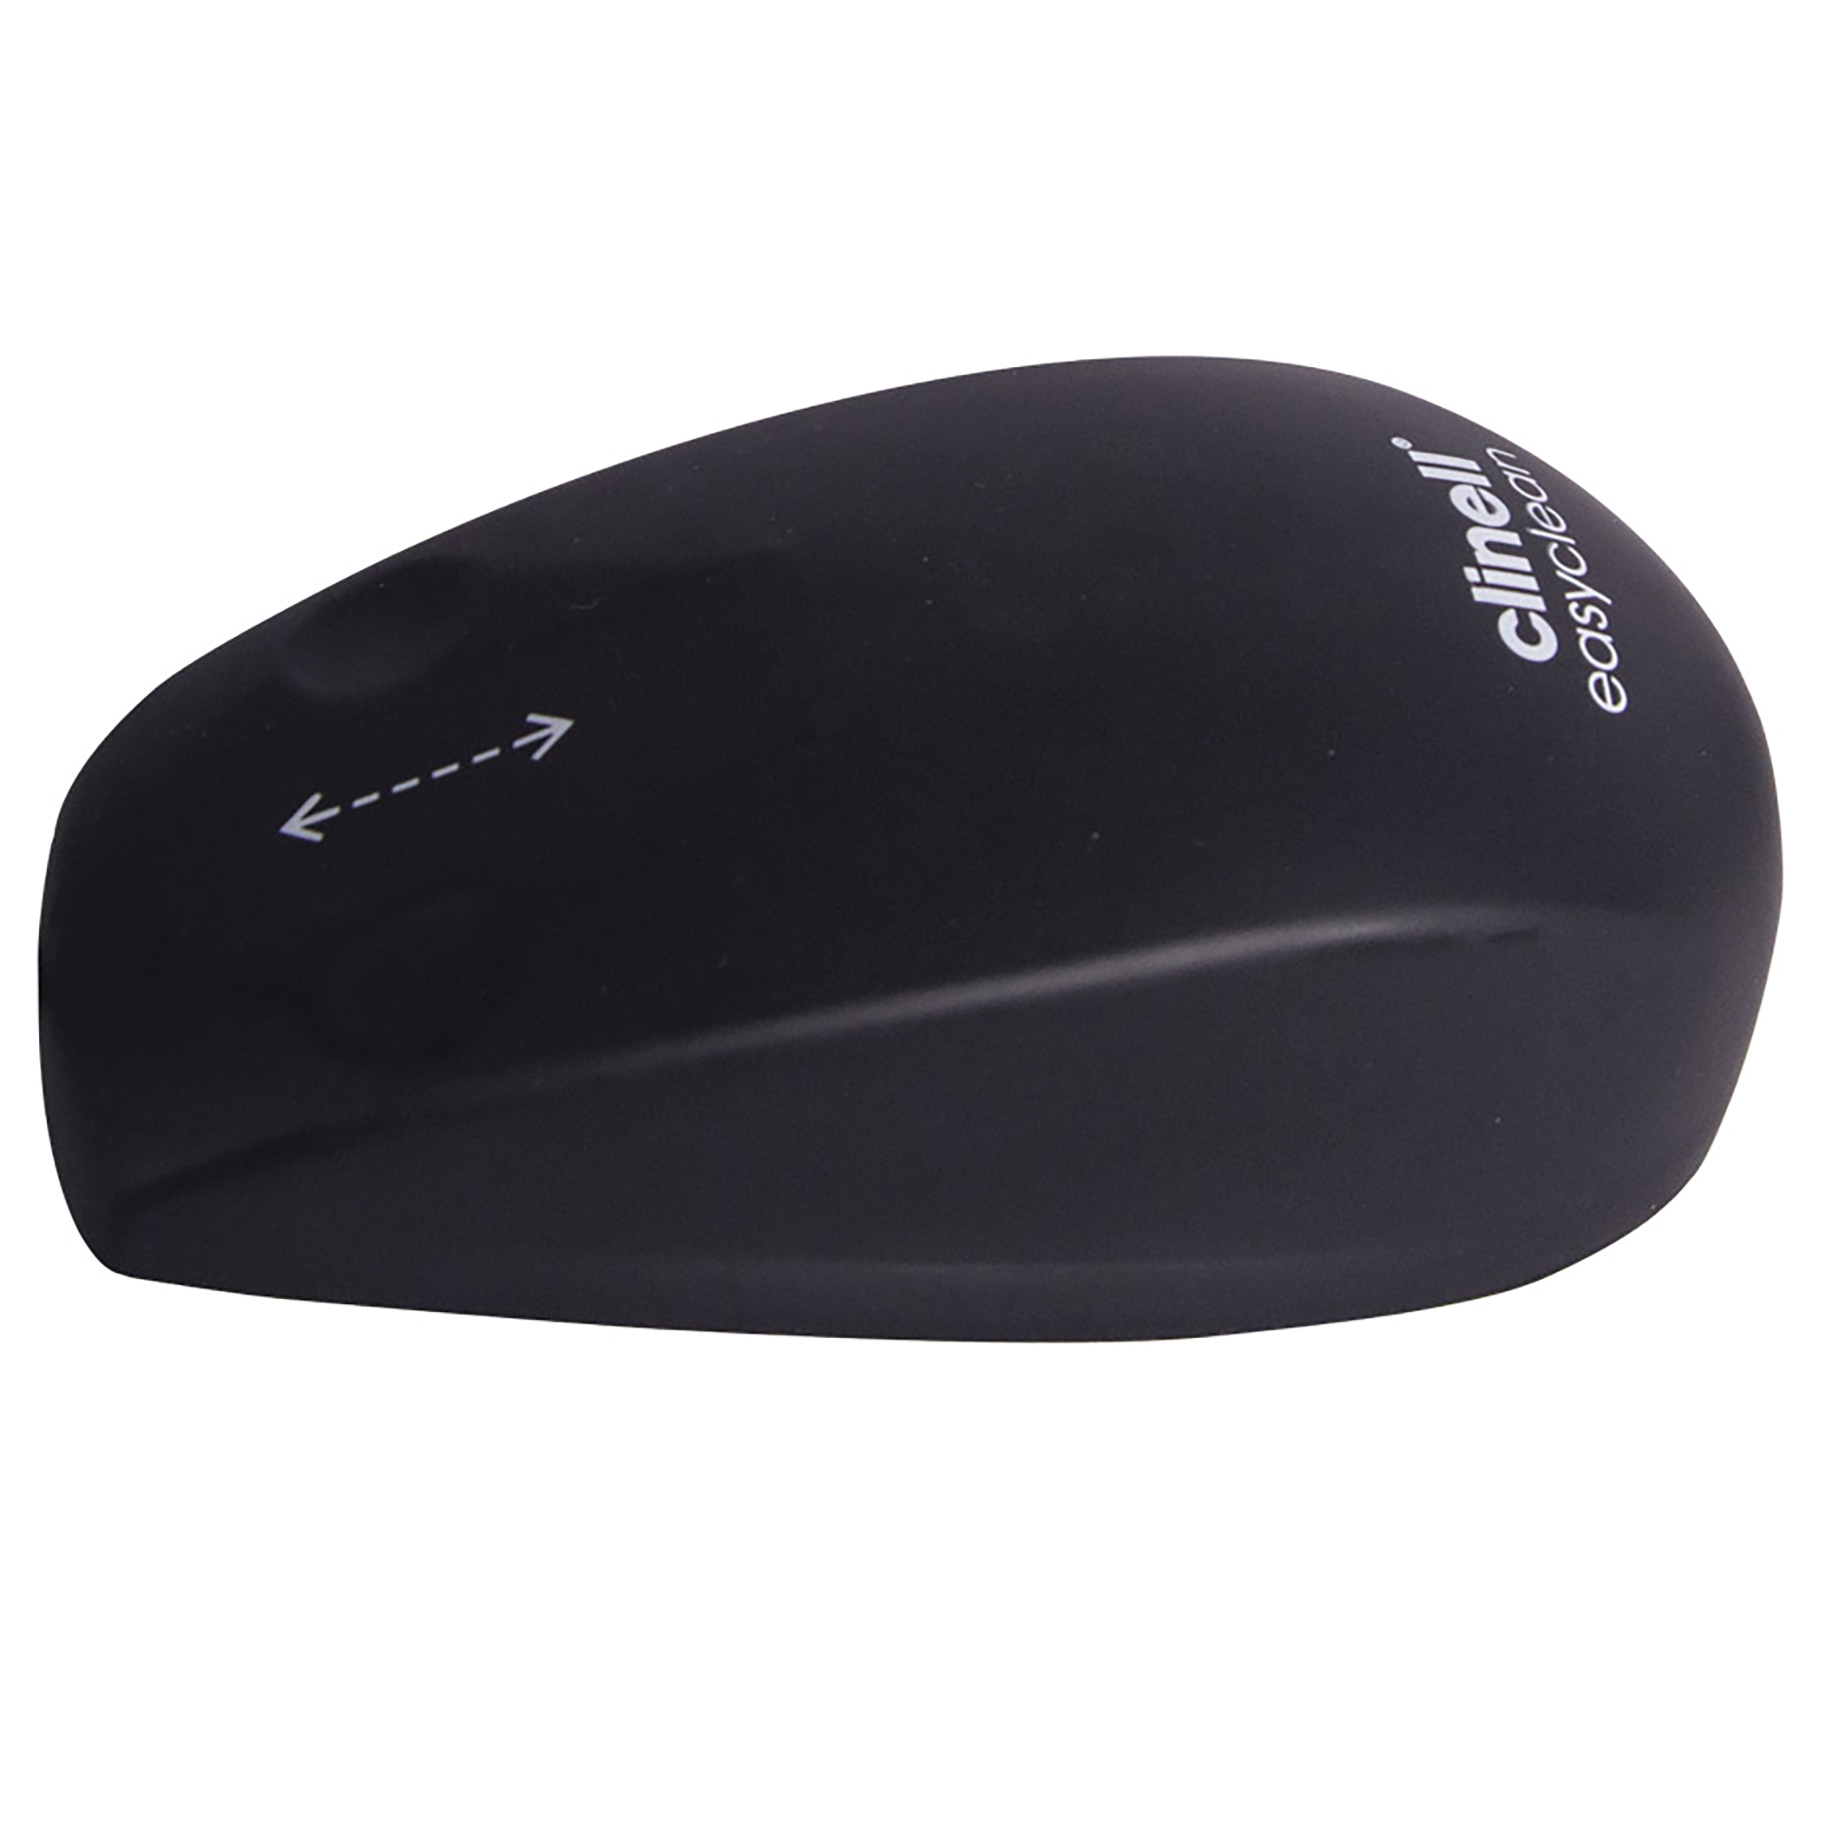 Easyclean Silicone Mouse Black - not wireless 